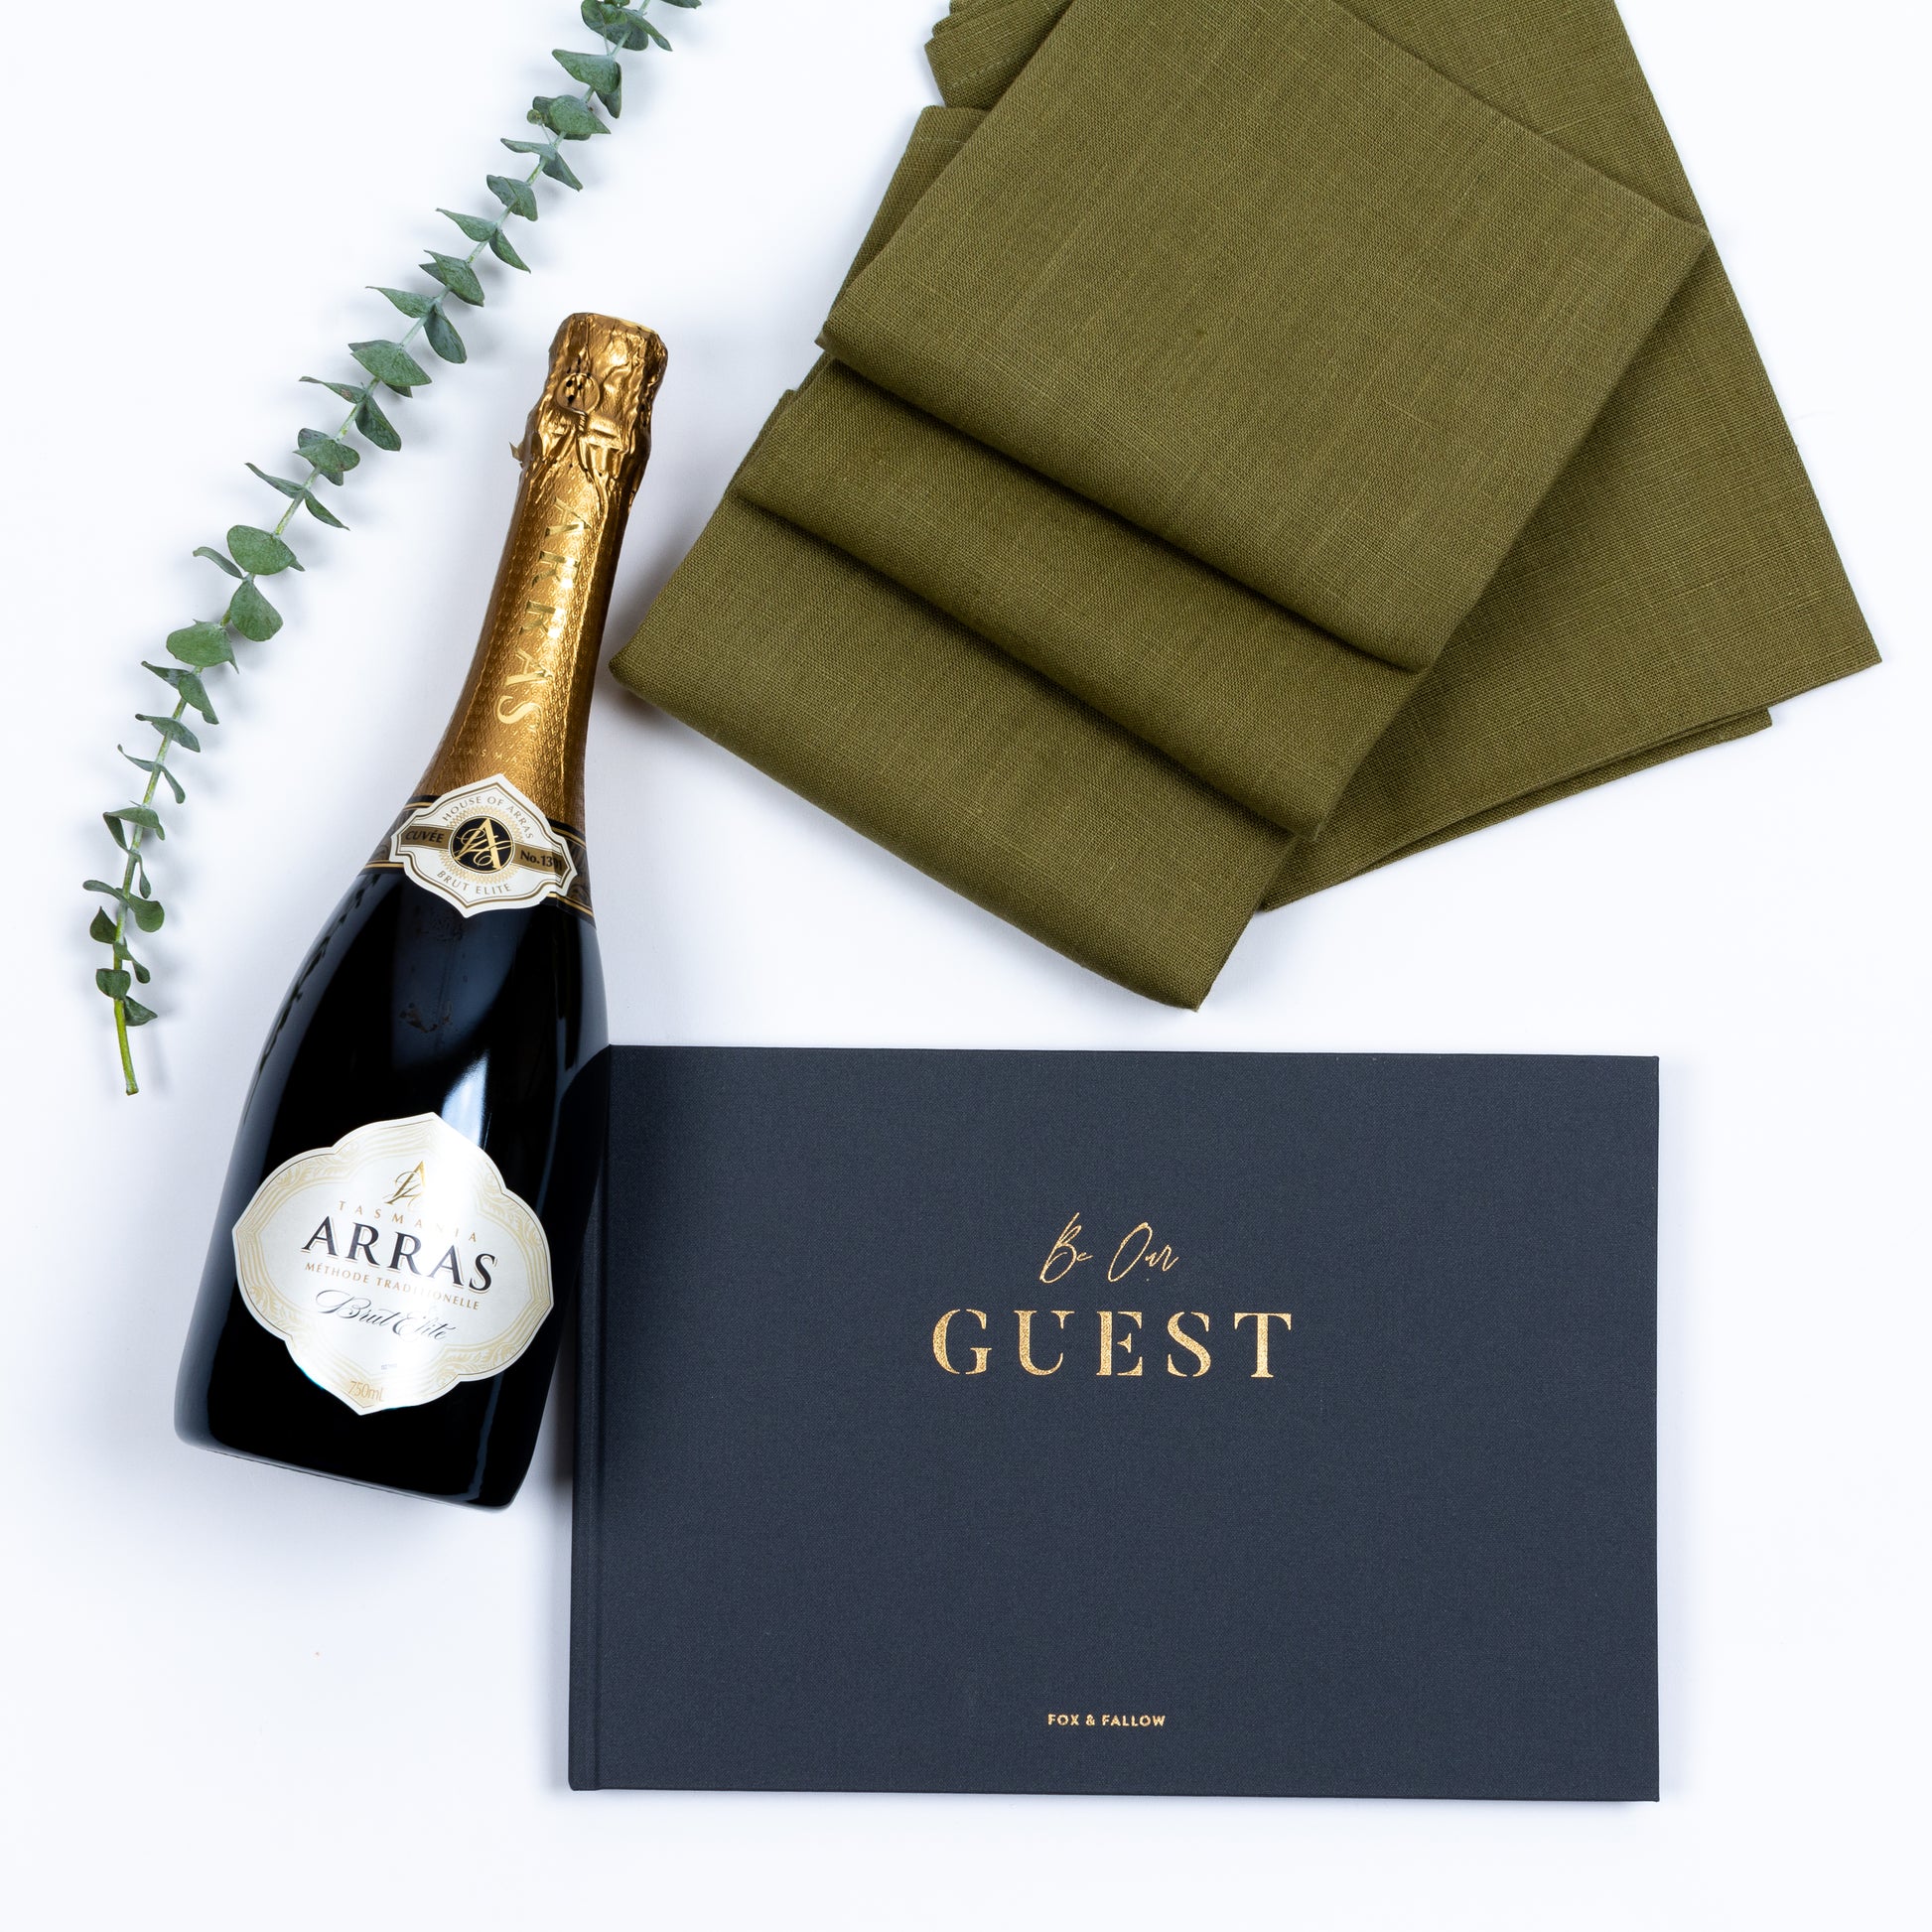 Products featured out of gift box are linen napkins, guest book, bubbly. 